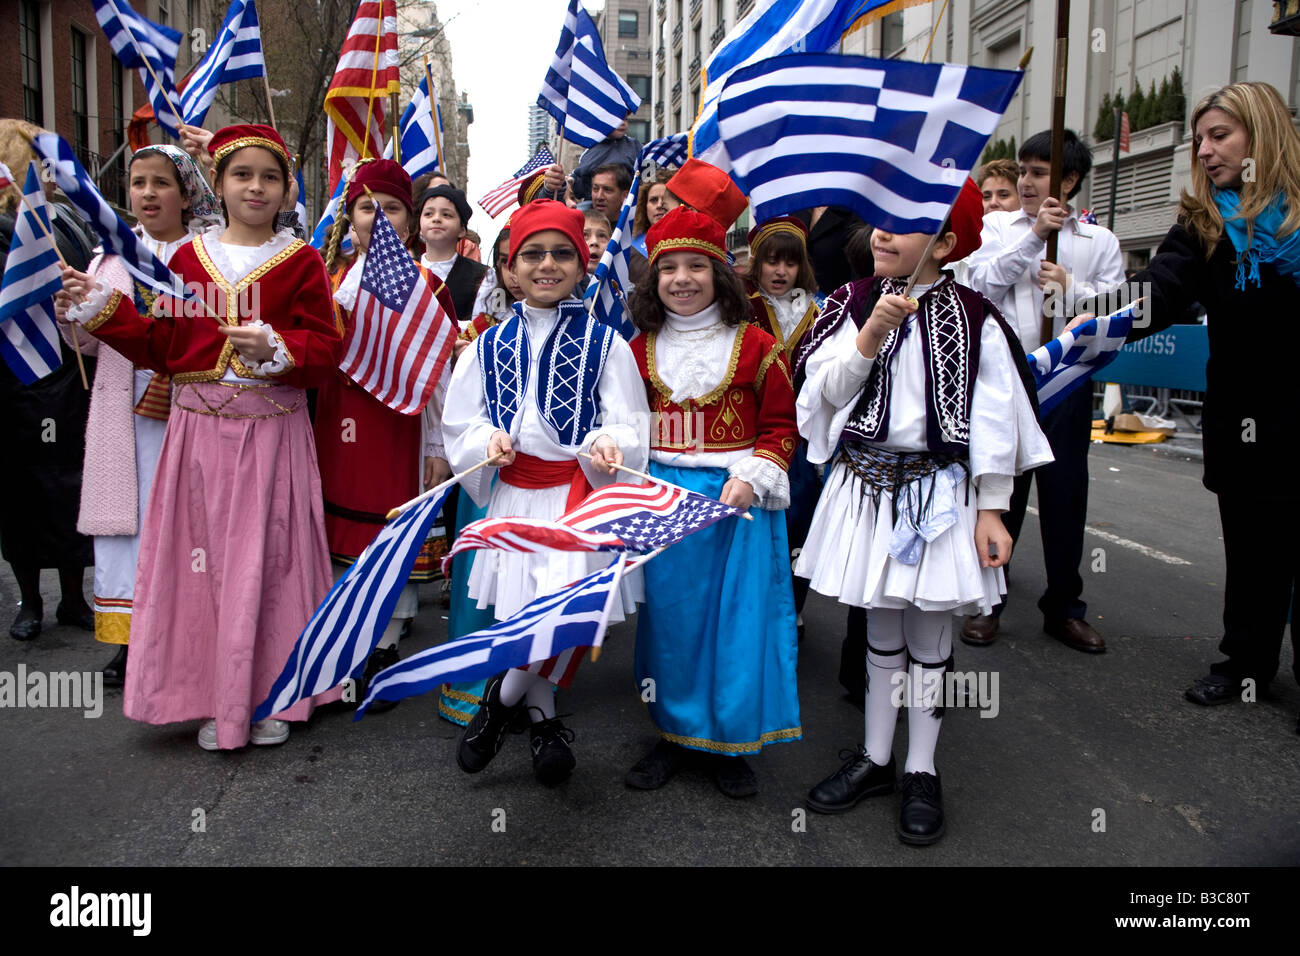 2008 Greek Independence Day Parade on 5th Avenue in New York City Stock